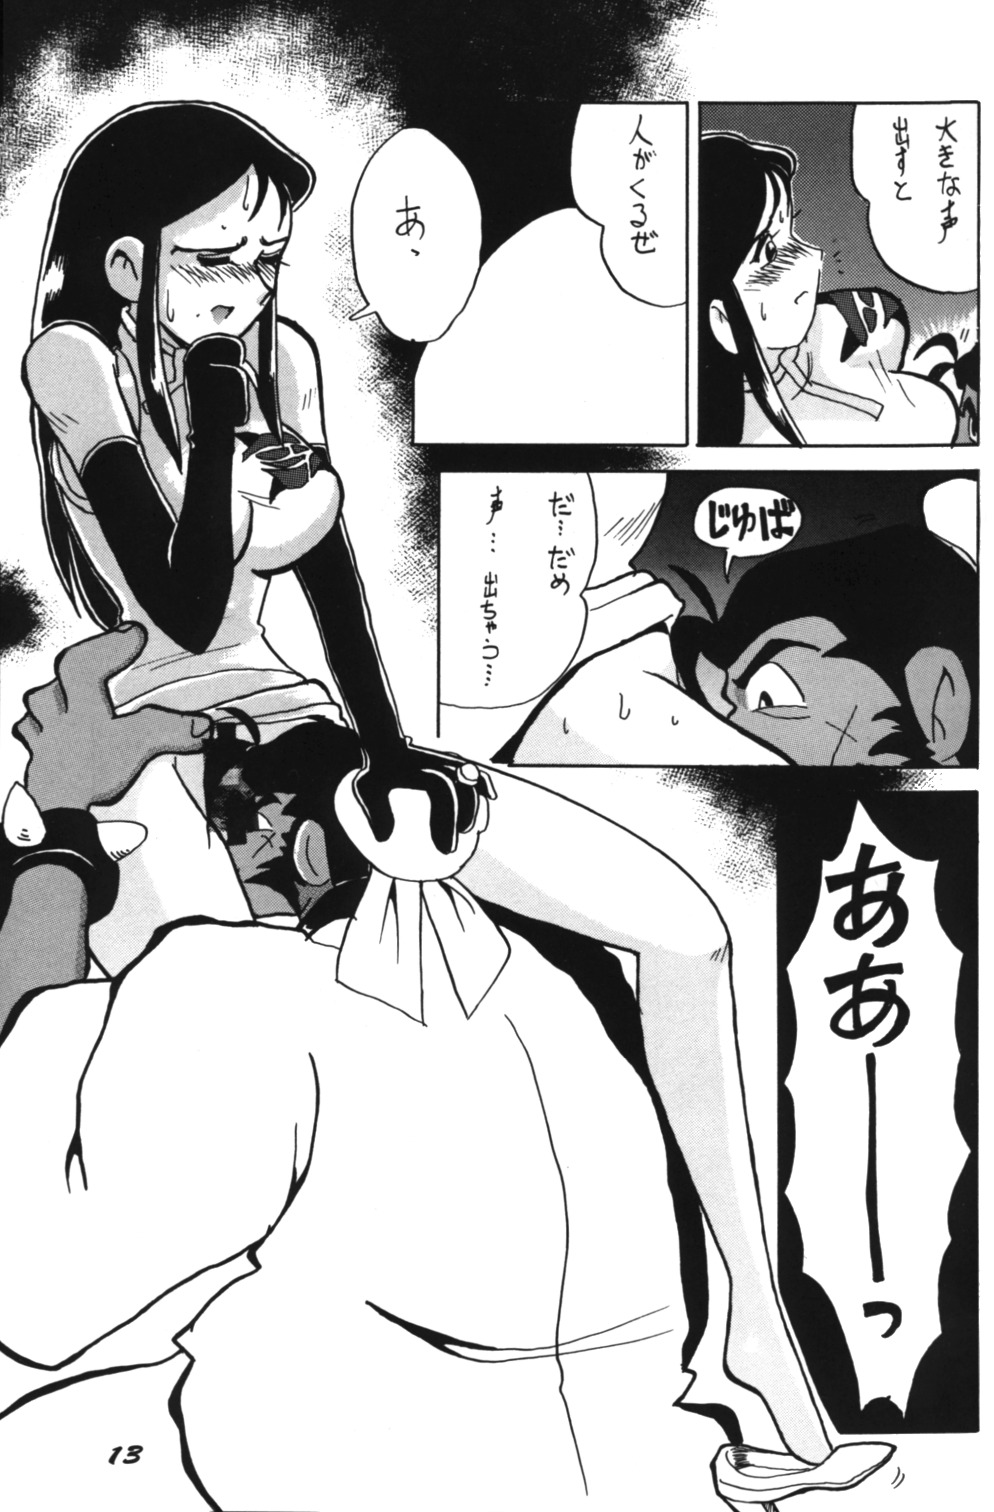 Ginrei Special GR-H (Giant Robo) page 13 full